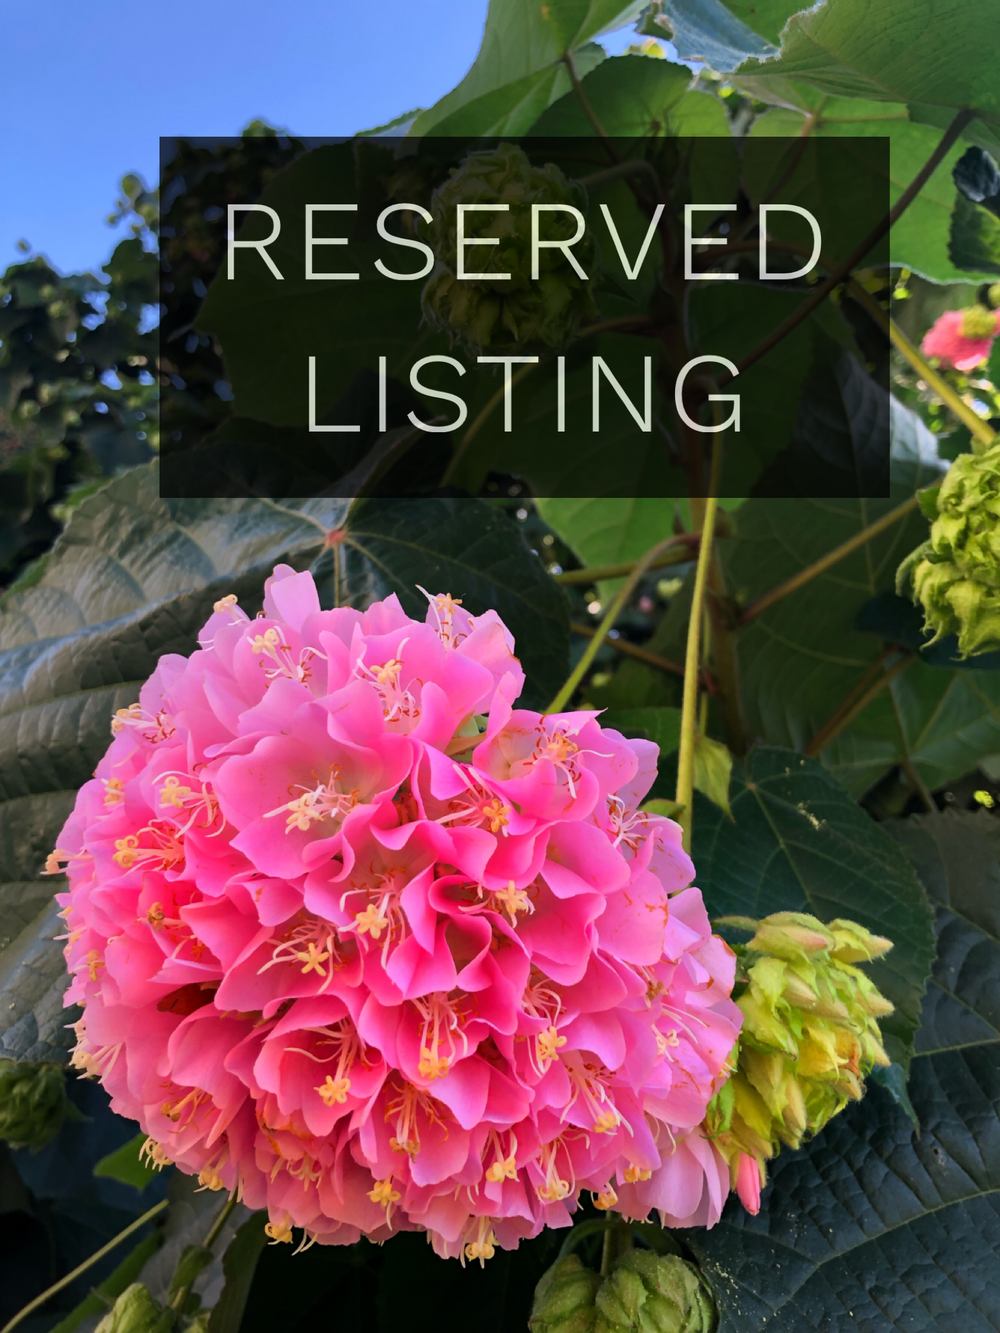 RESERVED LISTING - luc.g.s